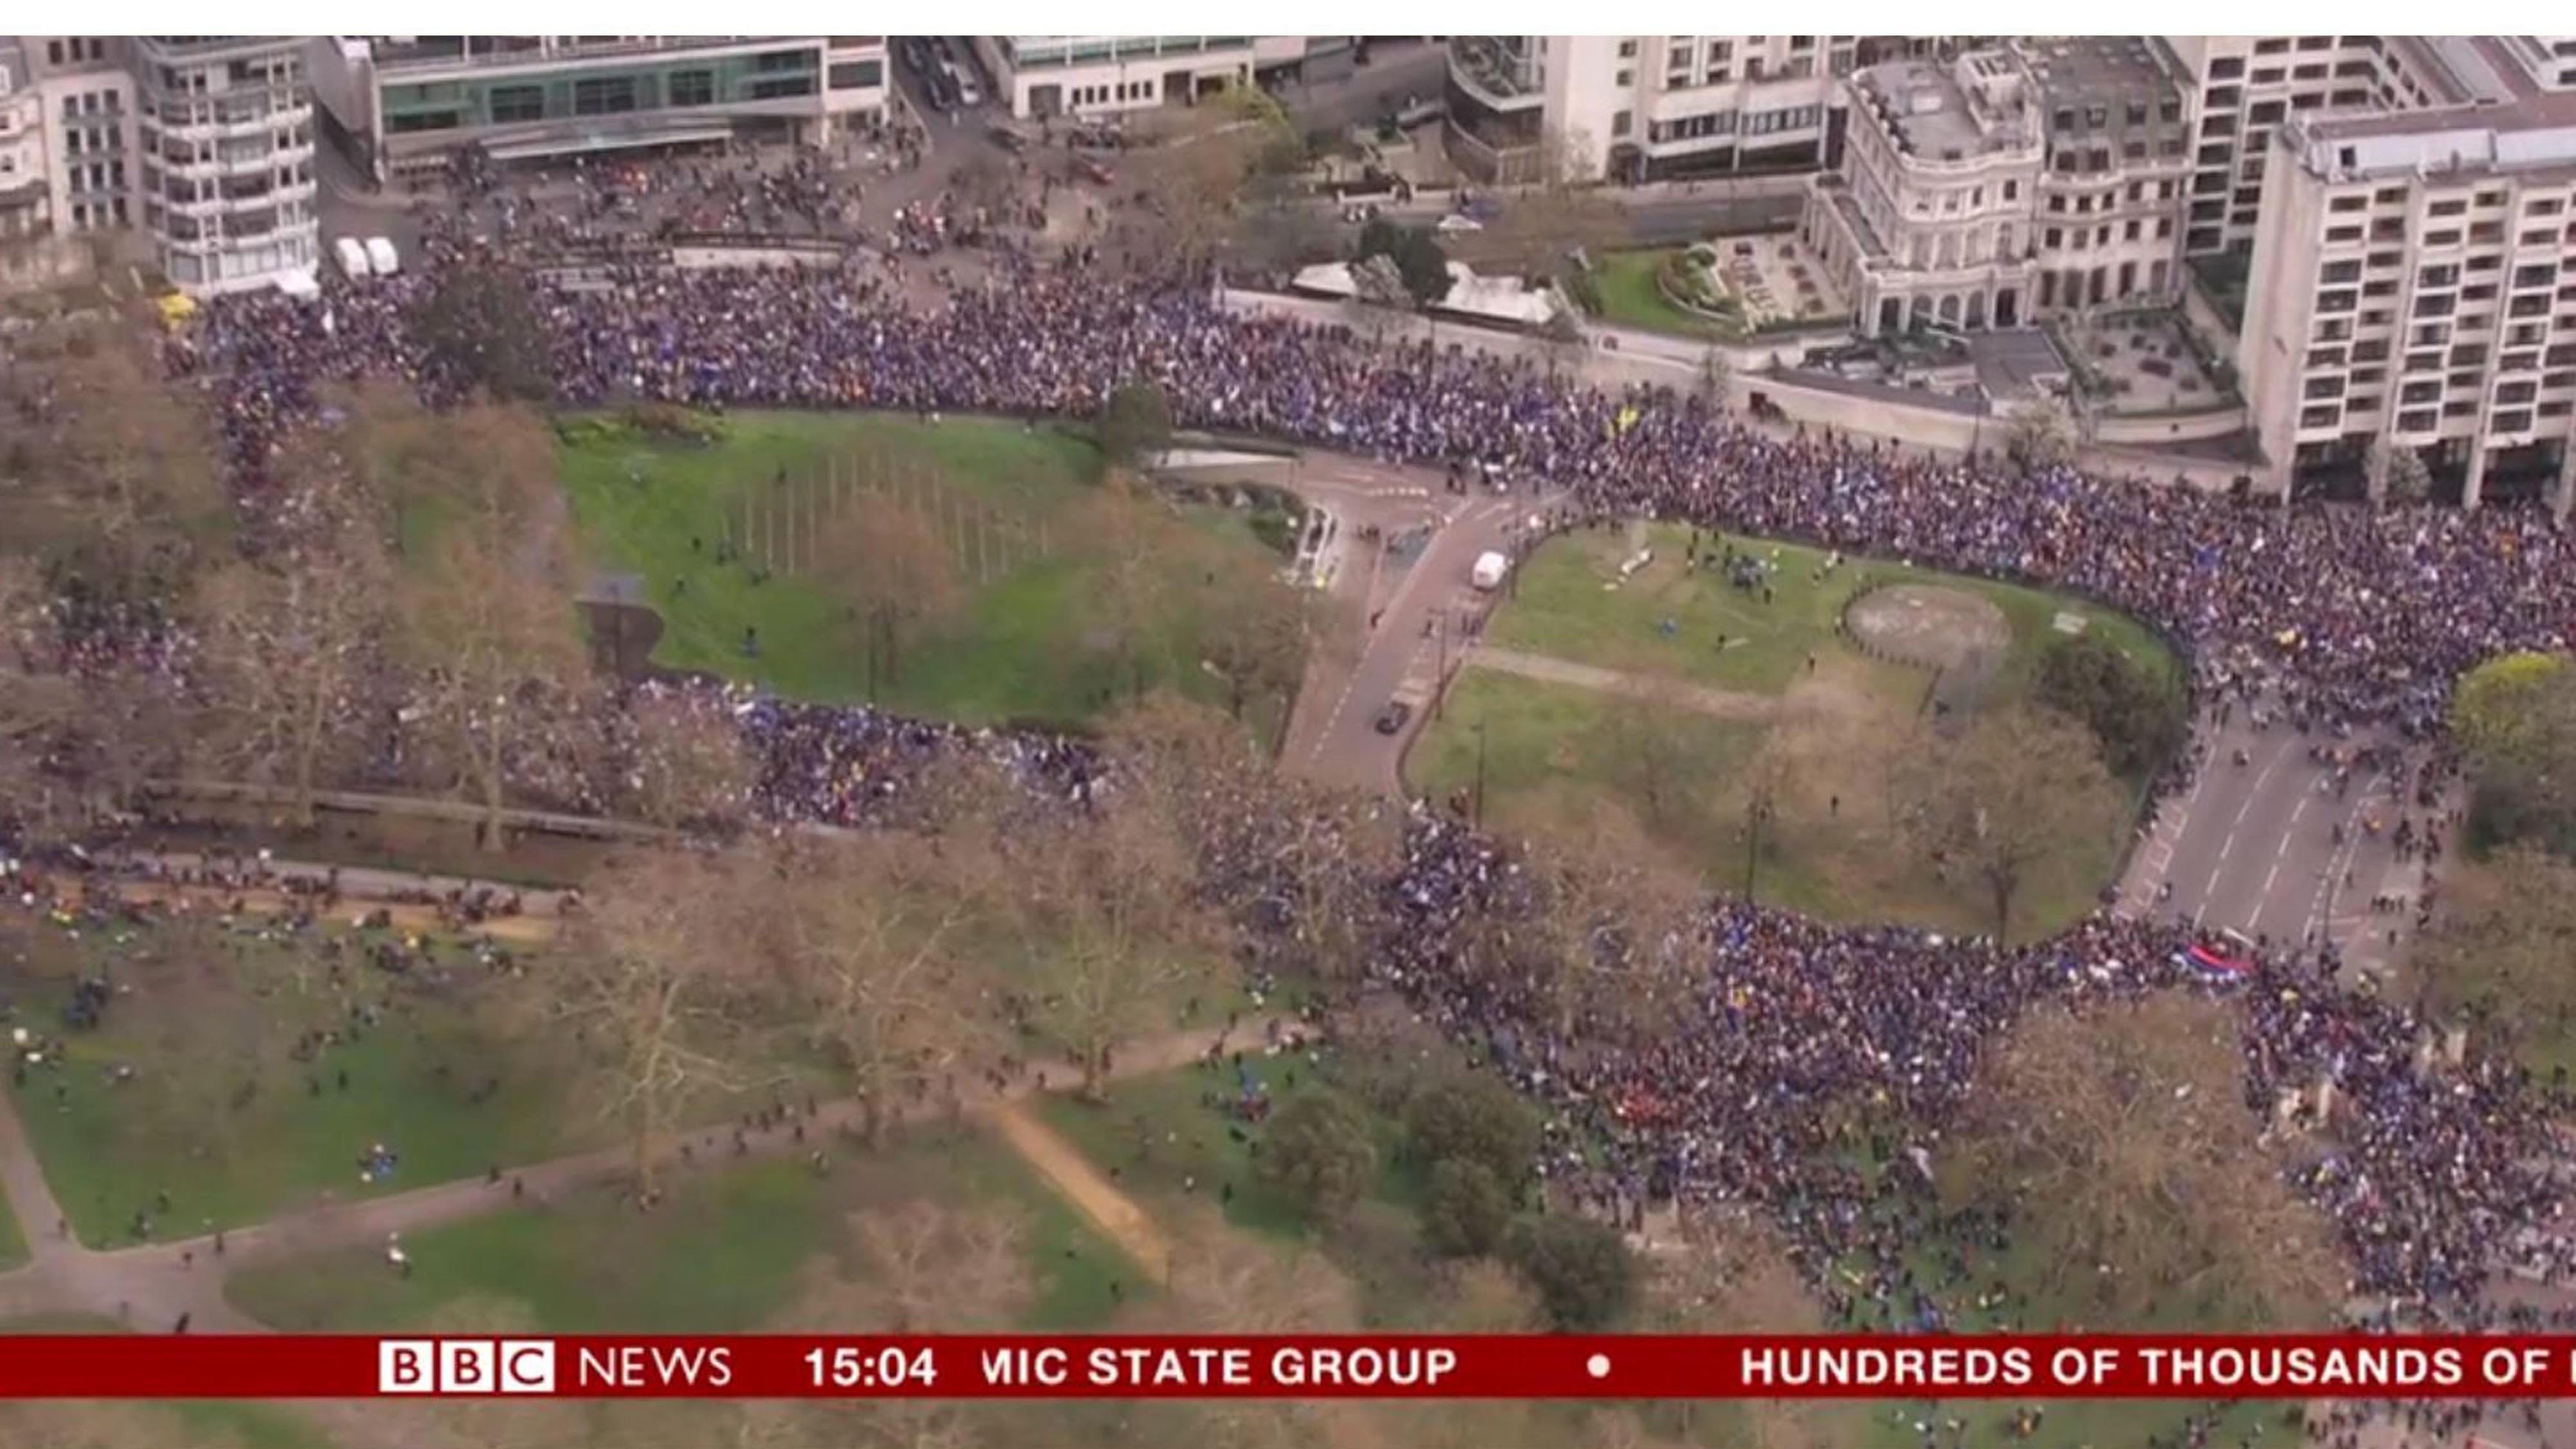 Screengrab taken from BBC News of an aerial view of the anti-Brexit campaigners marching in London (BBC/PA)